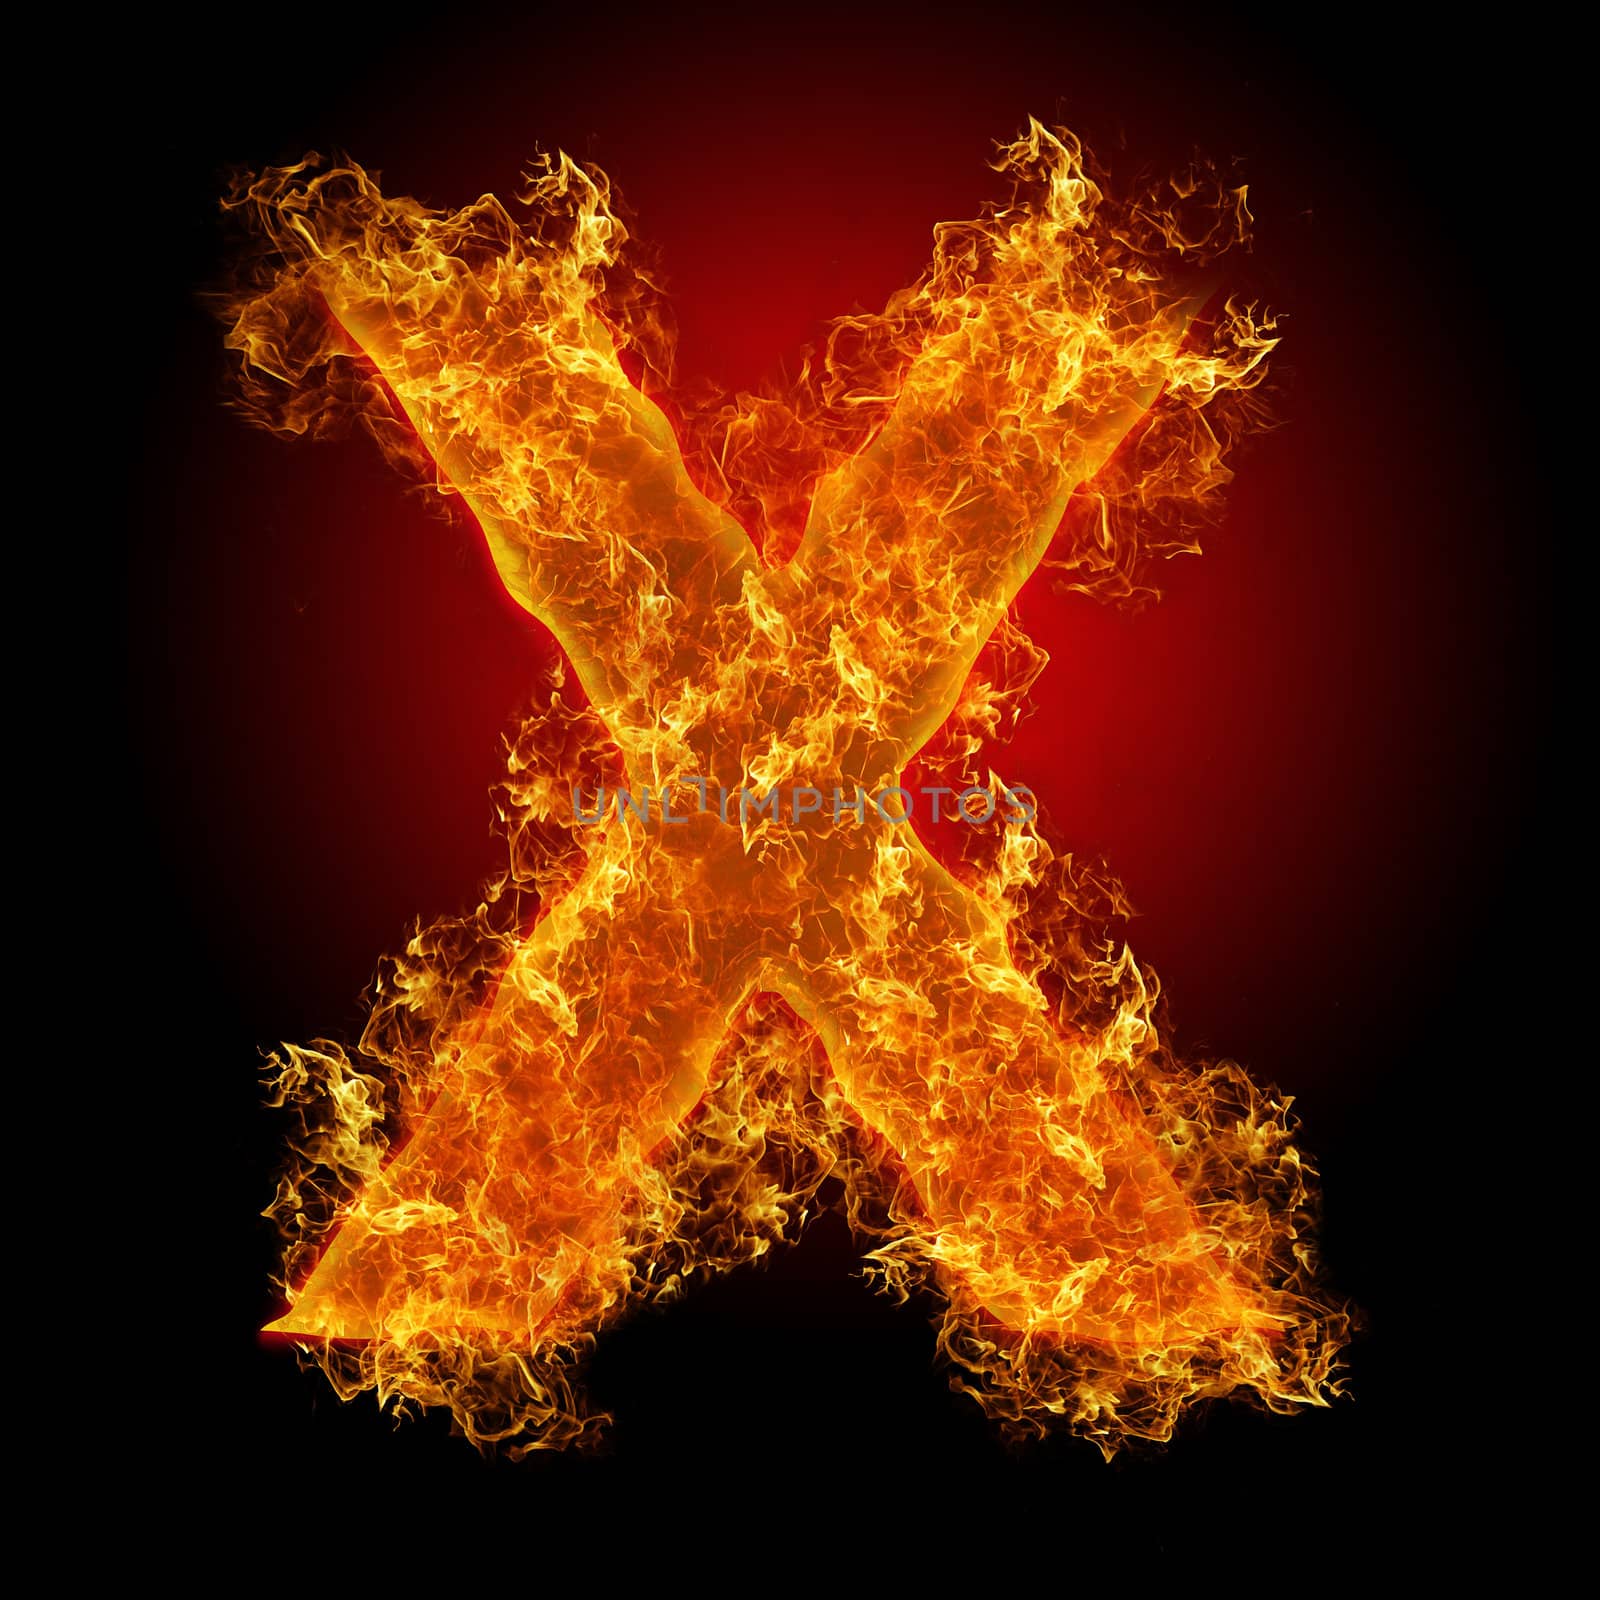 Fire letter X by rusak